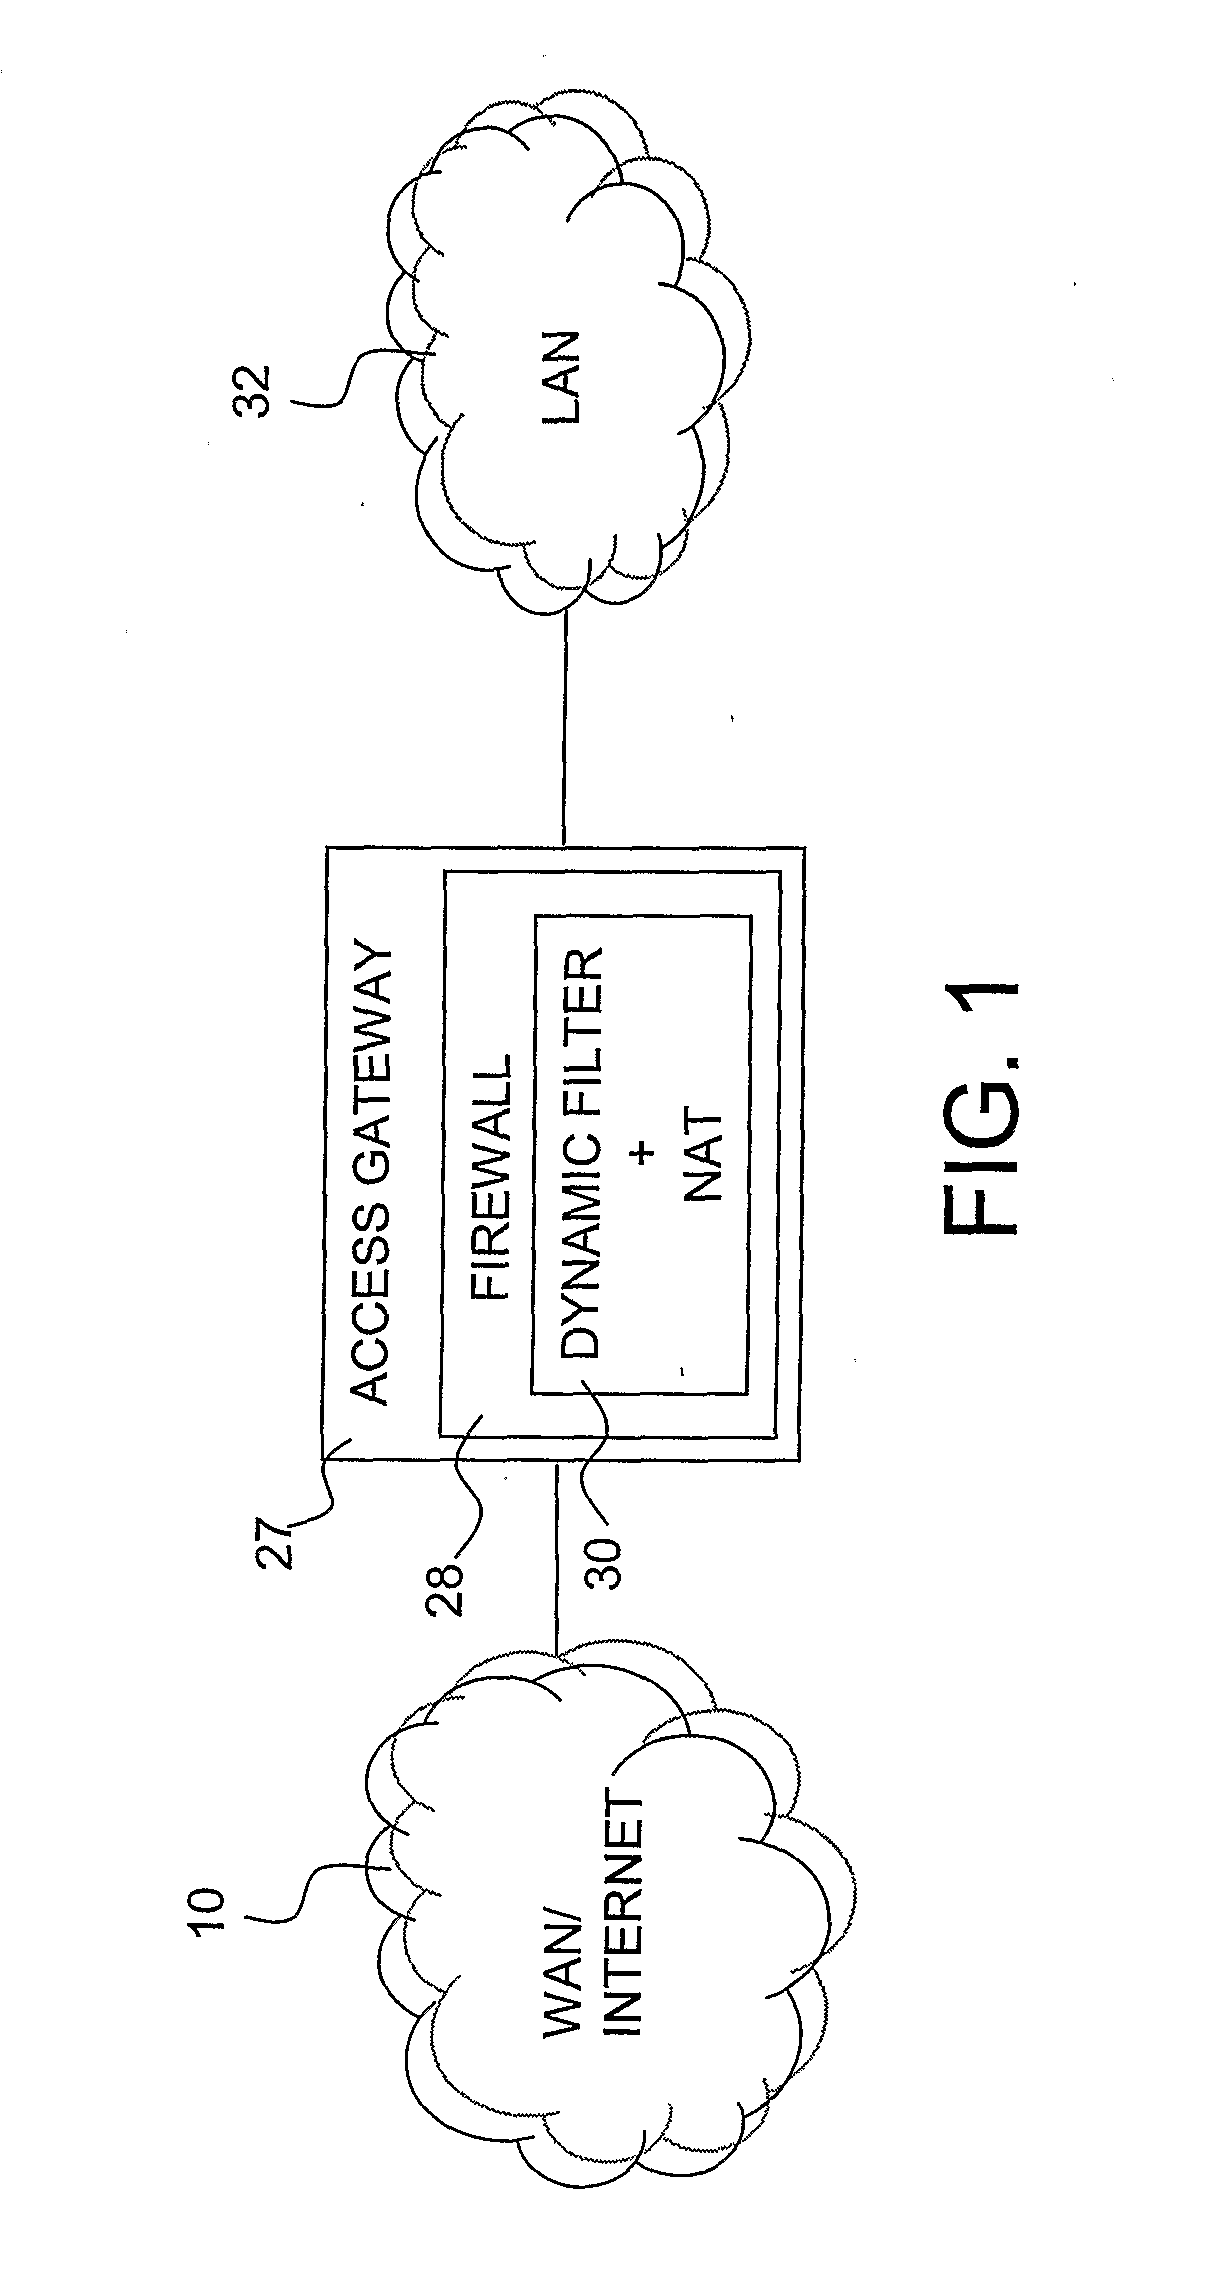 Method and System for Secure Communication Between a Public Network and a Local Network